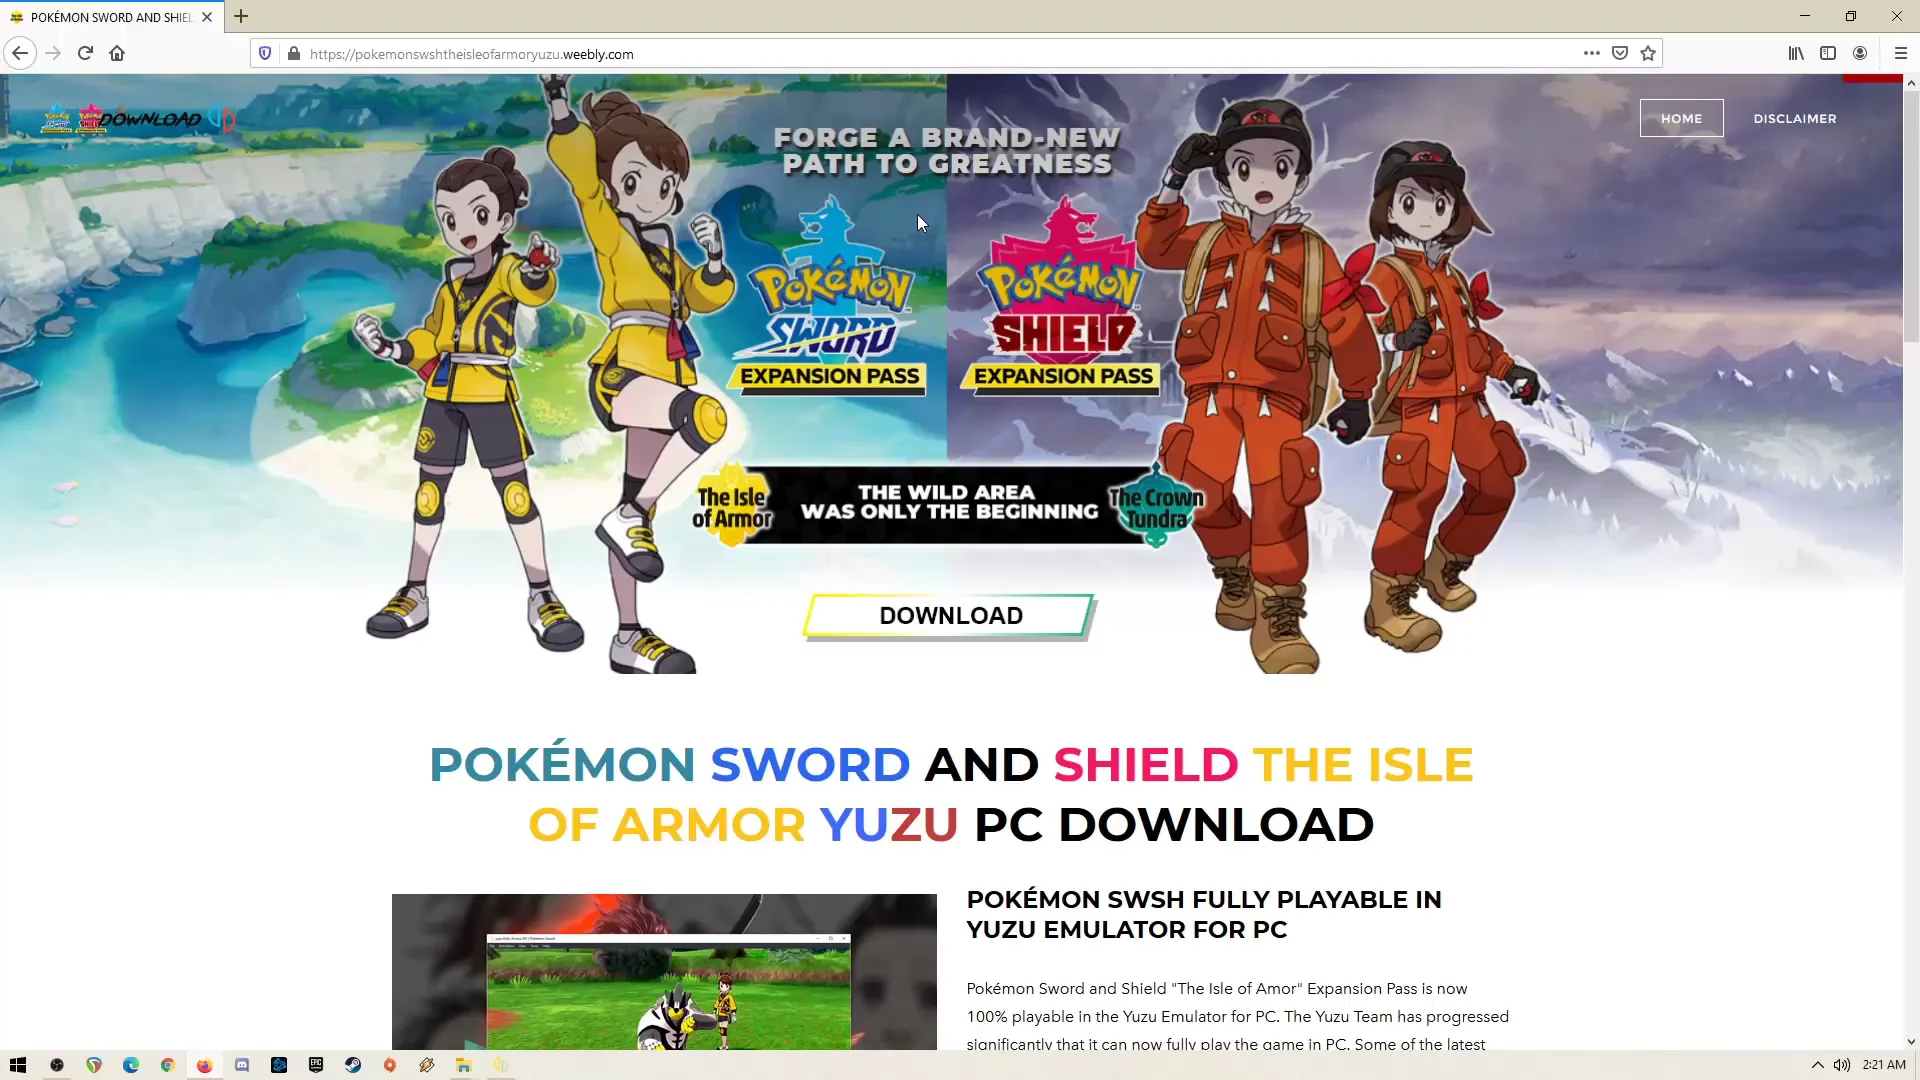 HOW TO POKEMON SWORD AND SHIELD WITH THE YUZU EMULATOR 